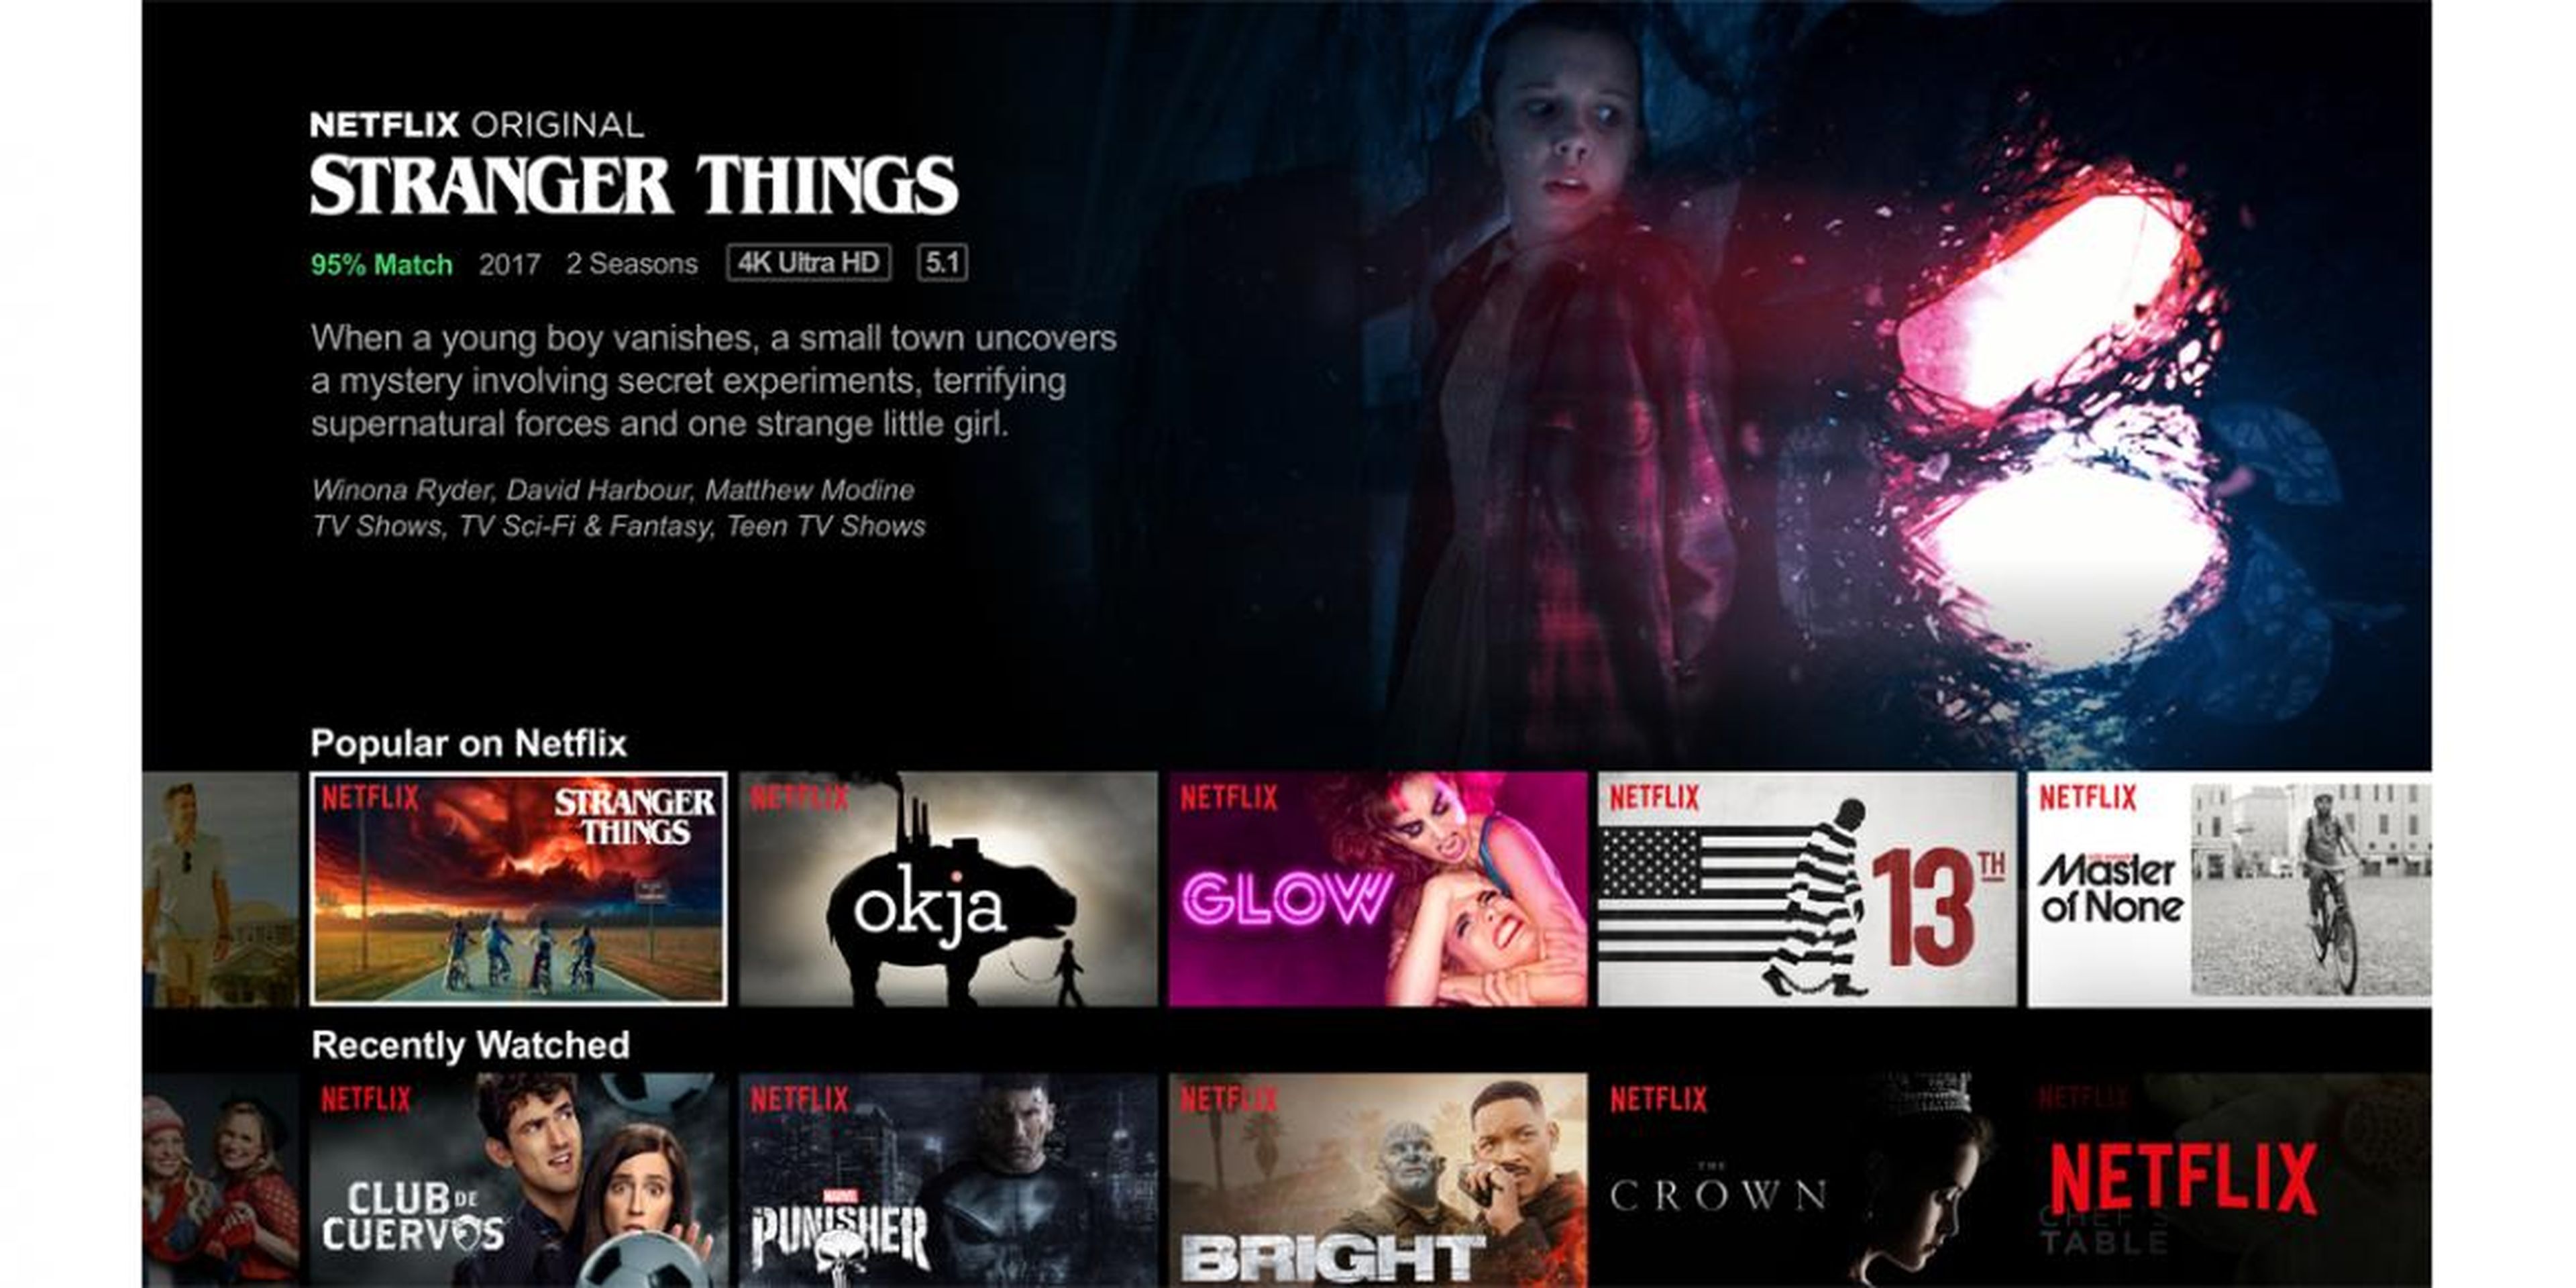 Netflix creates its own original content, but doesn't include premium channels.